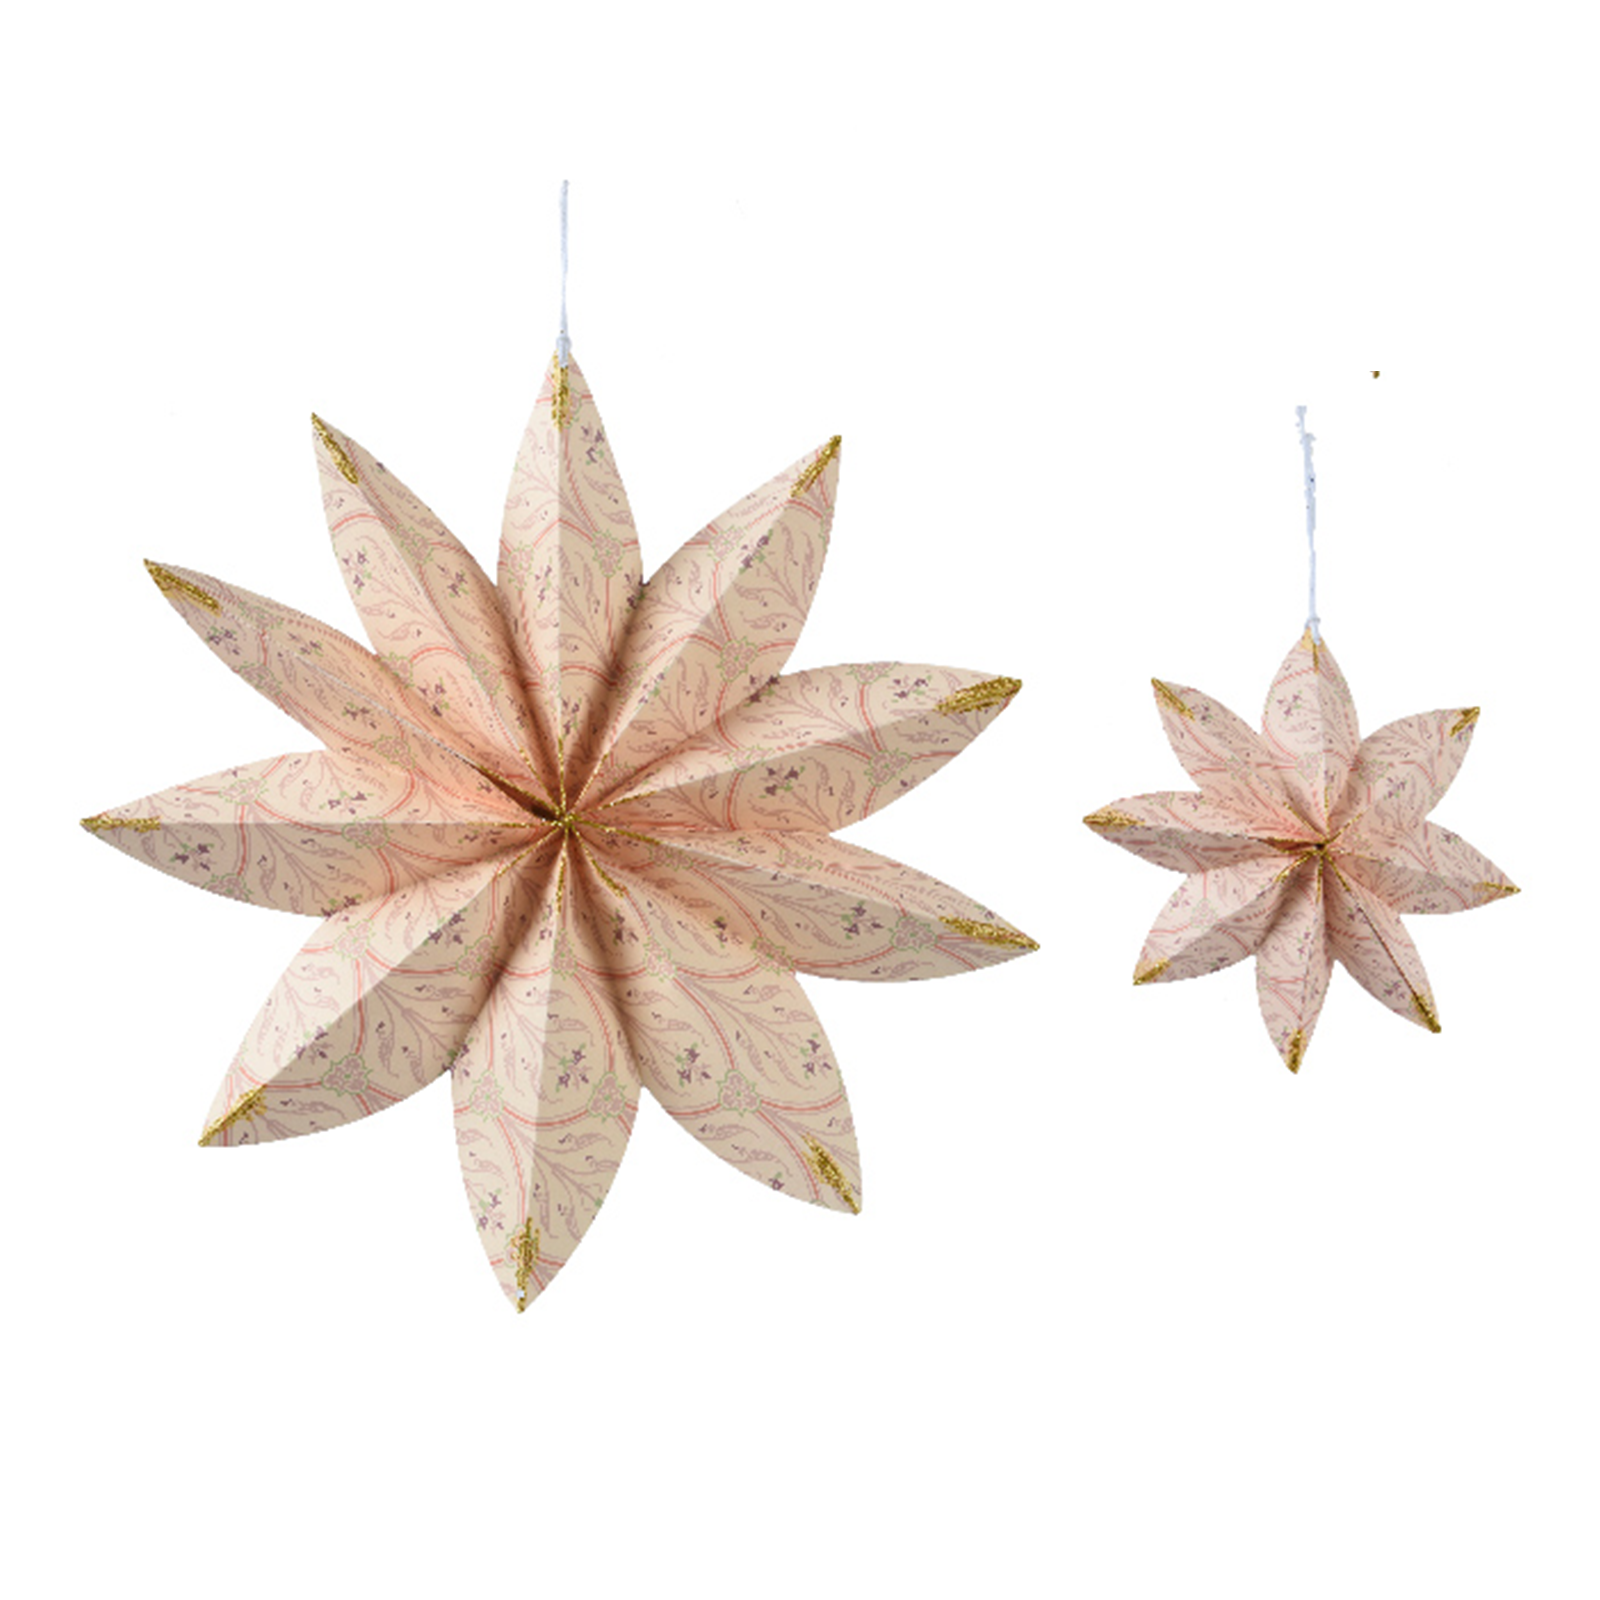 Two pink hanging paper stars, one larger and one smaller. They are patterned and dusted with glitter at the points.